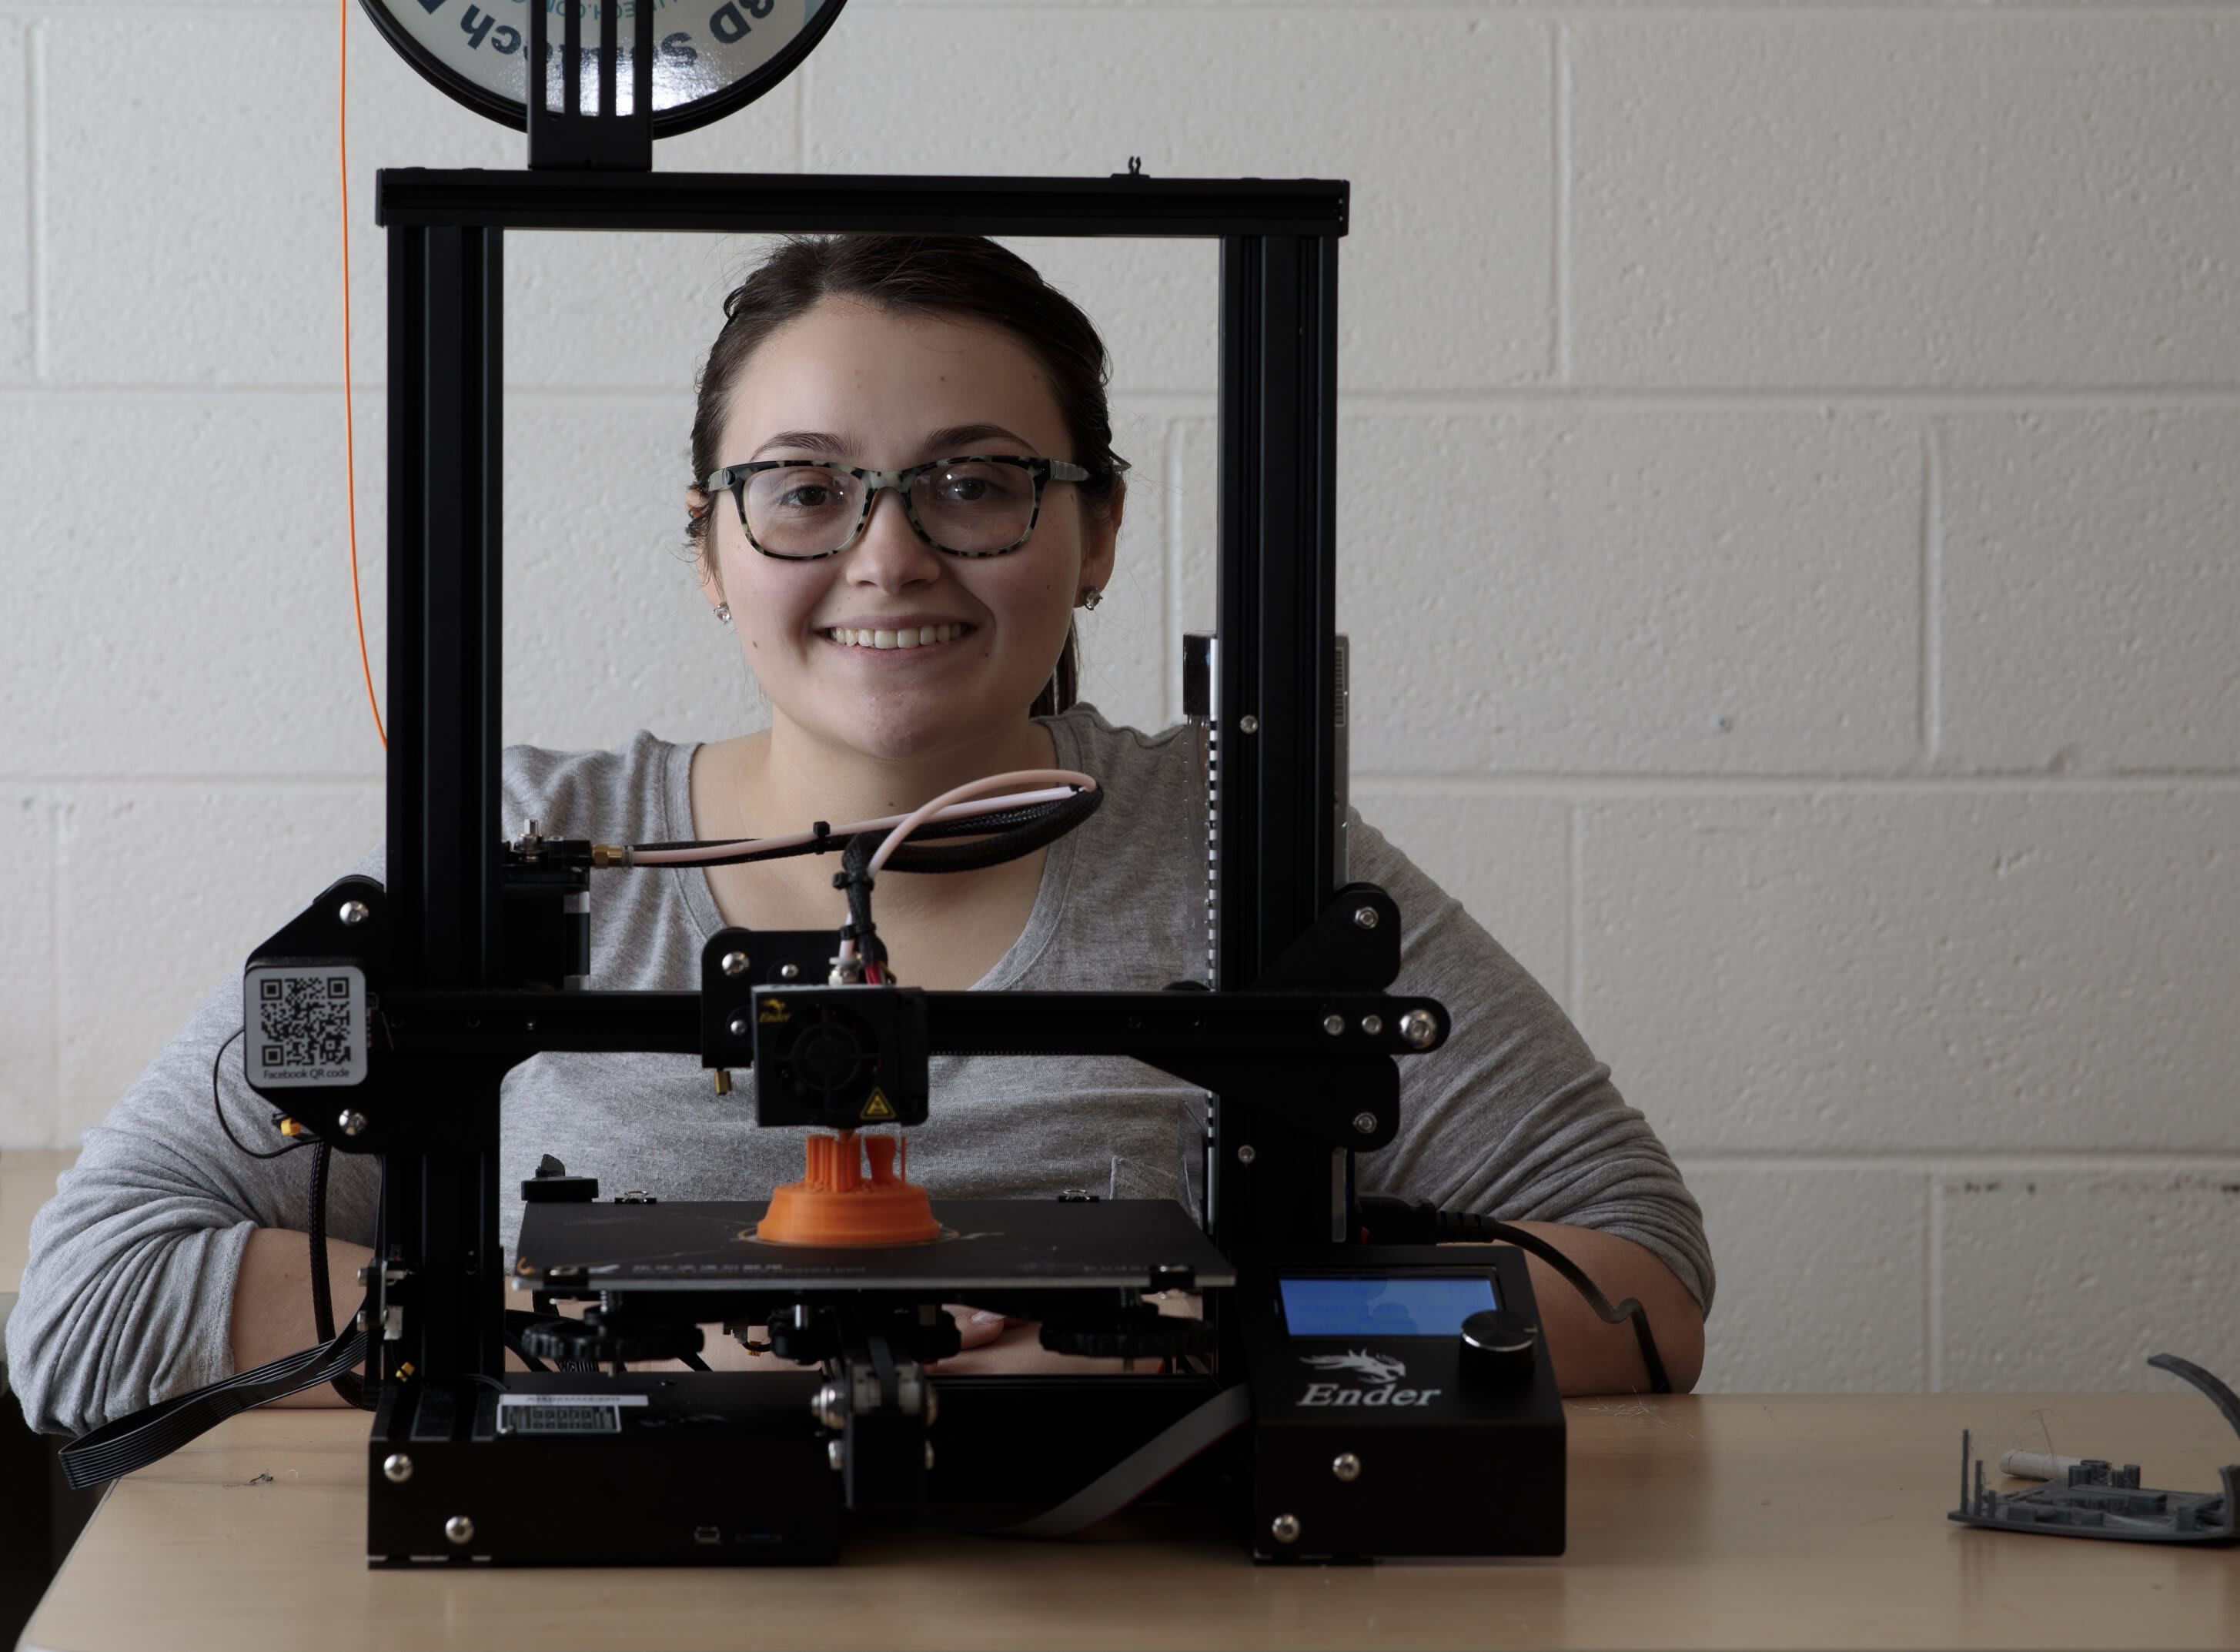 Ohio Northern University College of Engineering freshman Jennifer Hahn is photographed at the 3D printer.